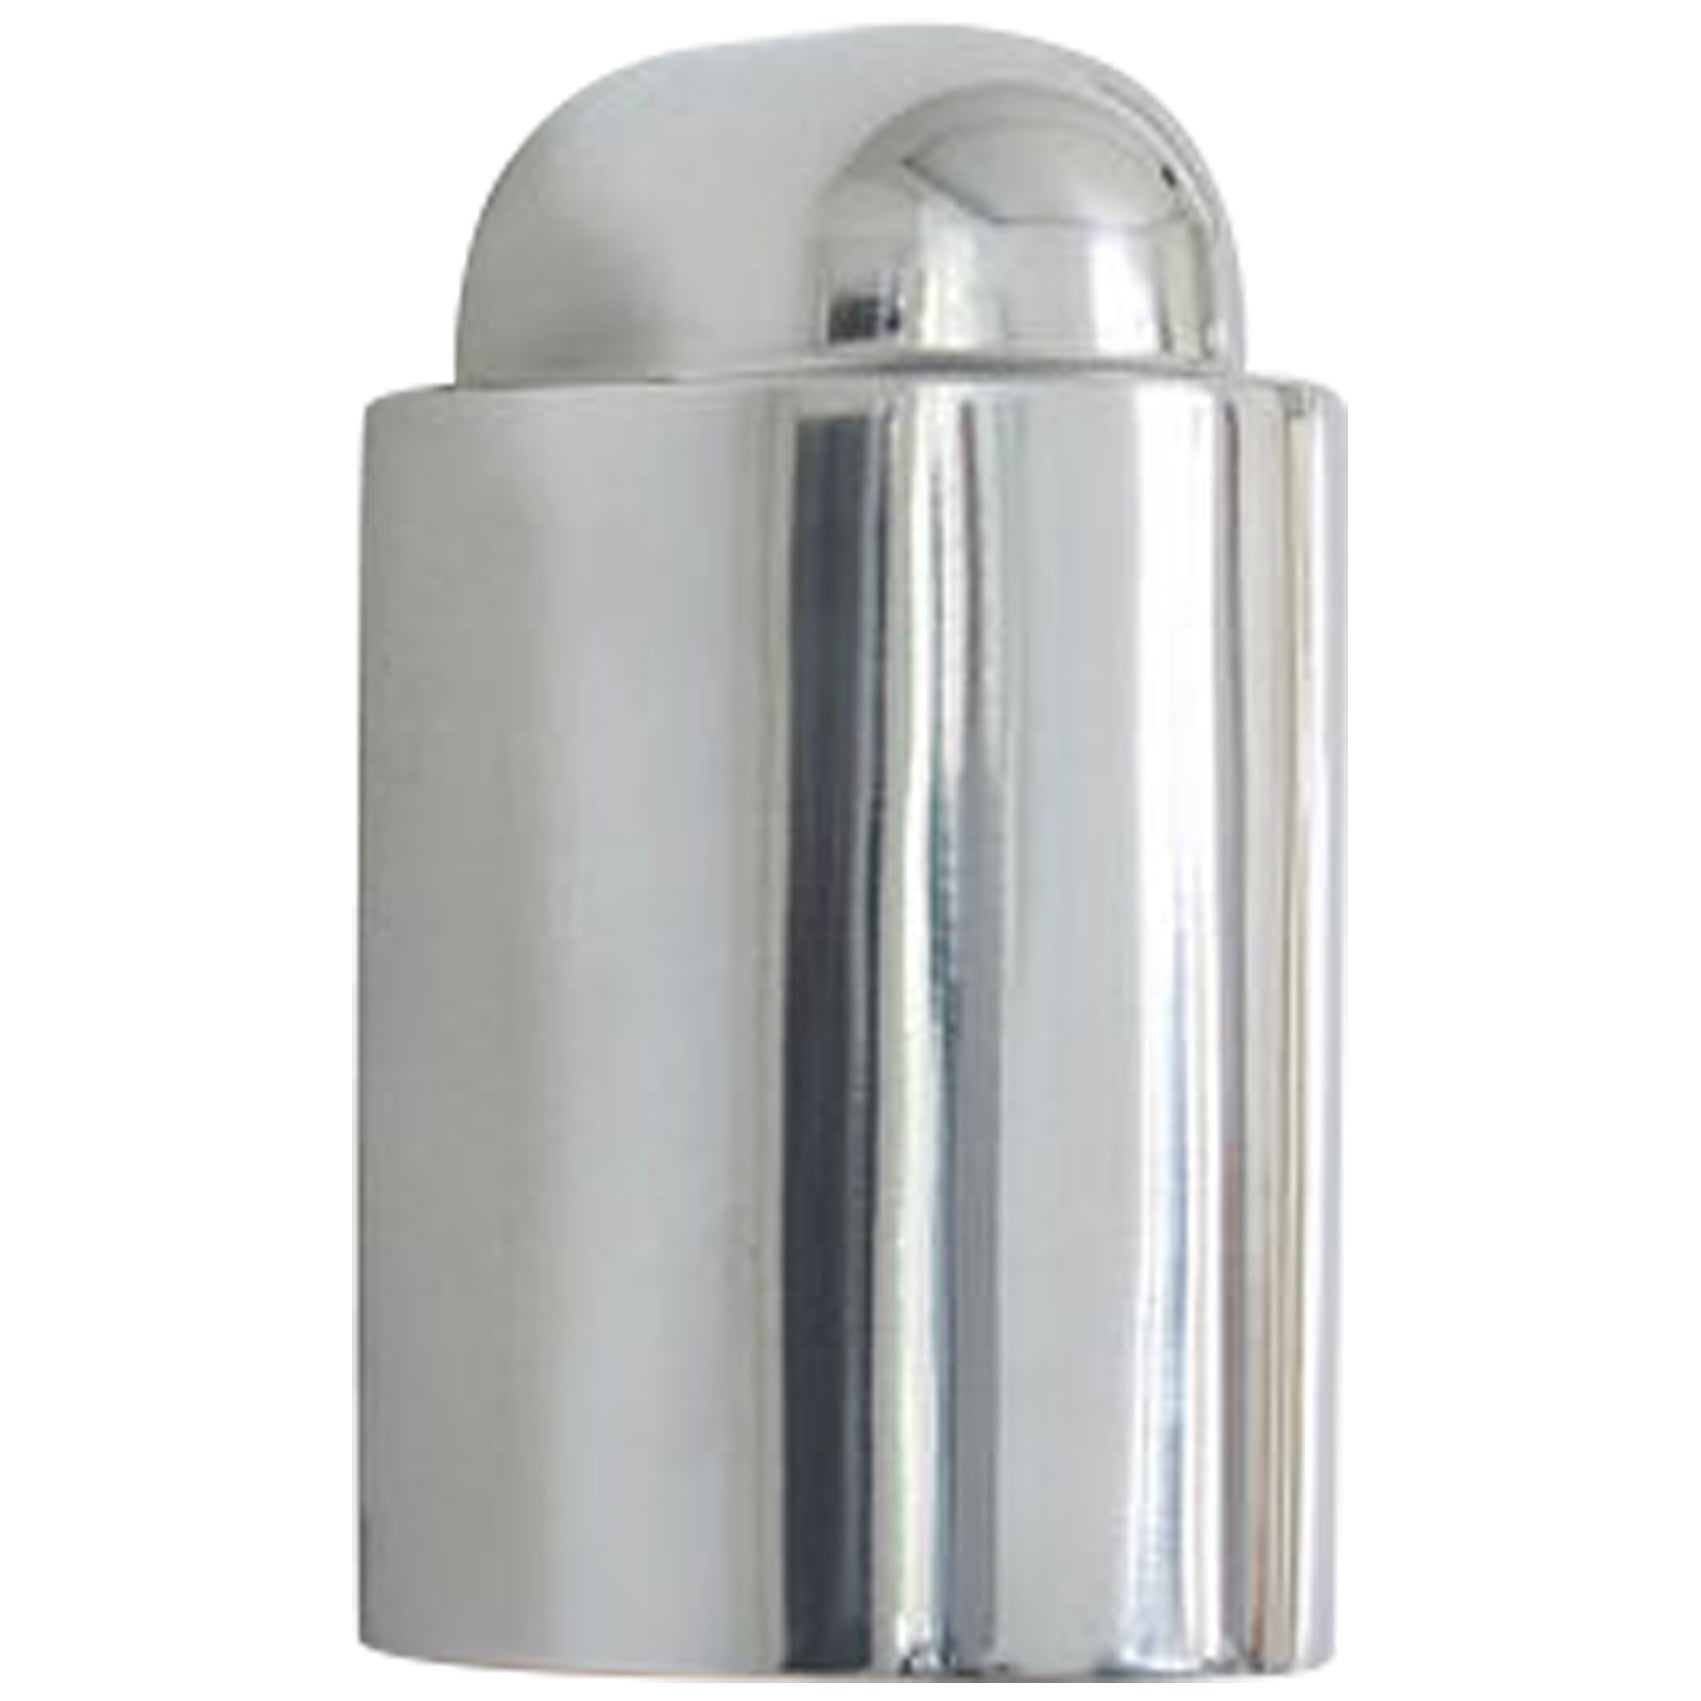 Decade Mini Step Light, Polished by Dunlin